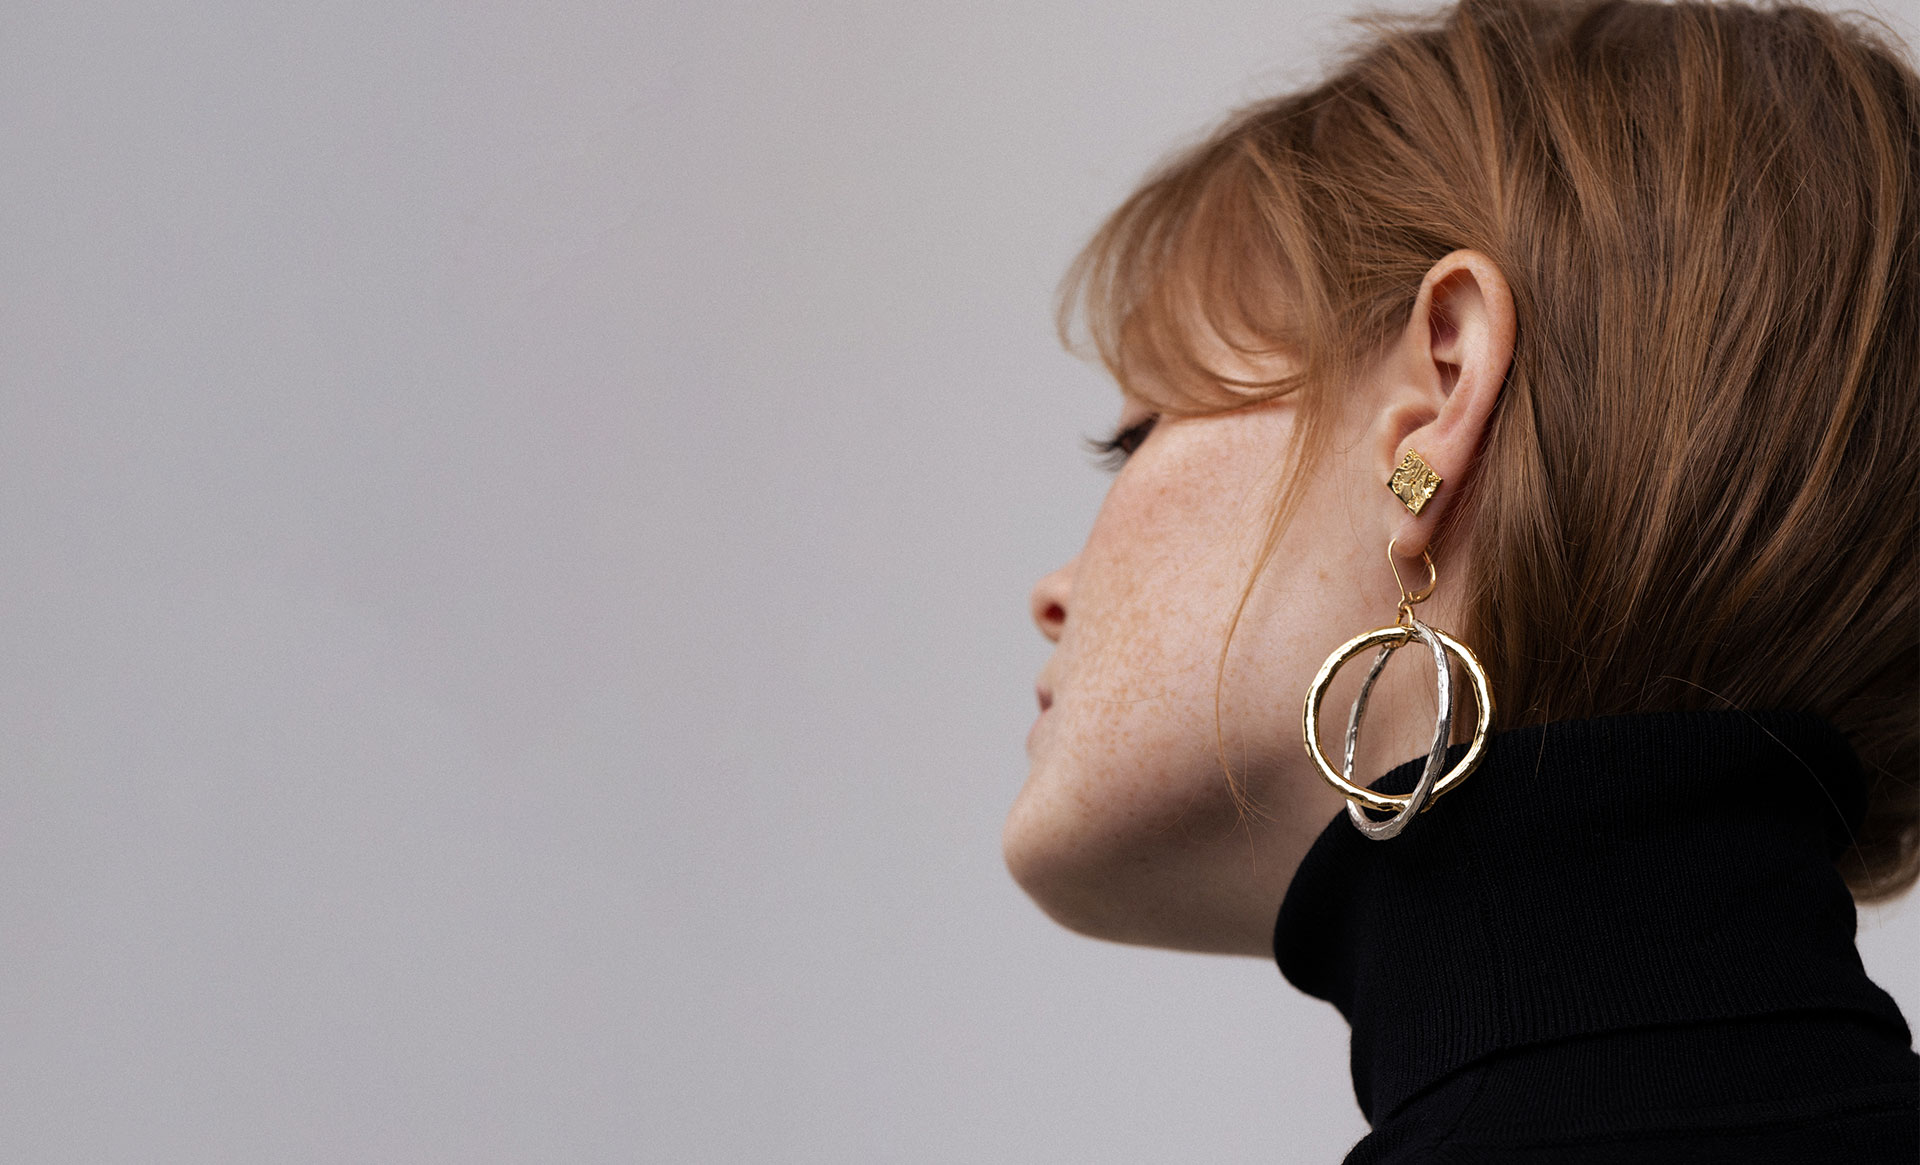 Fall for the new earrings